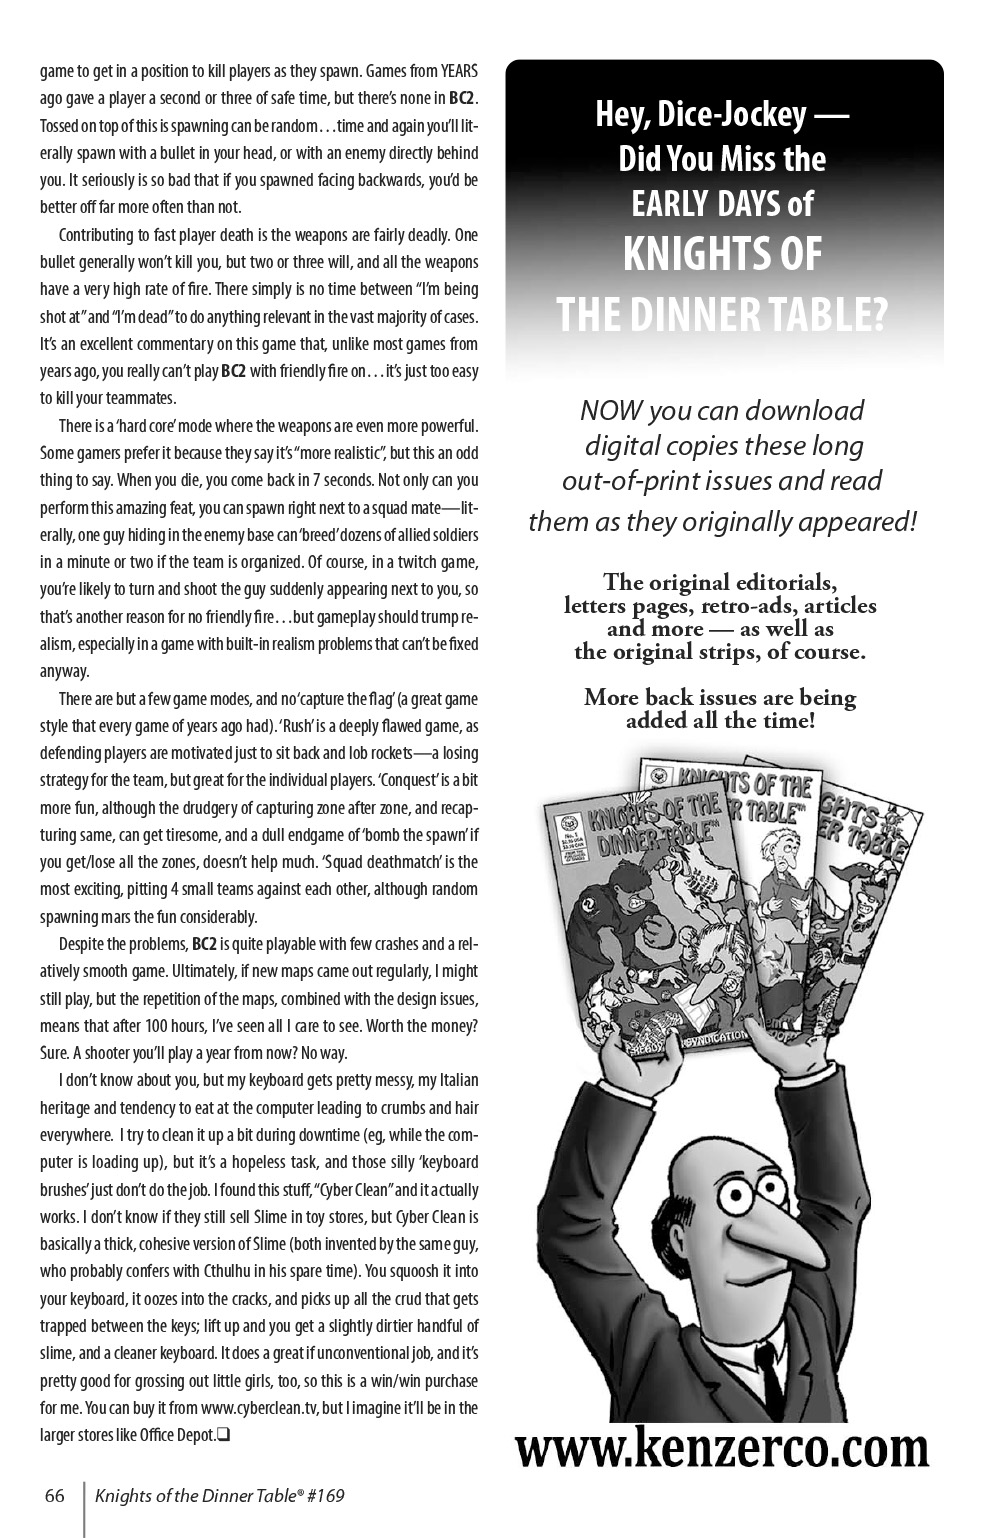 Read online Knights of the Dinner Table comic -  Issue #169 - 68